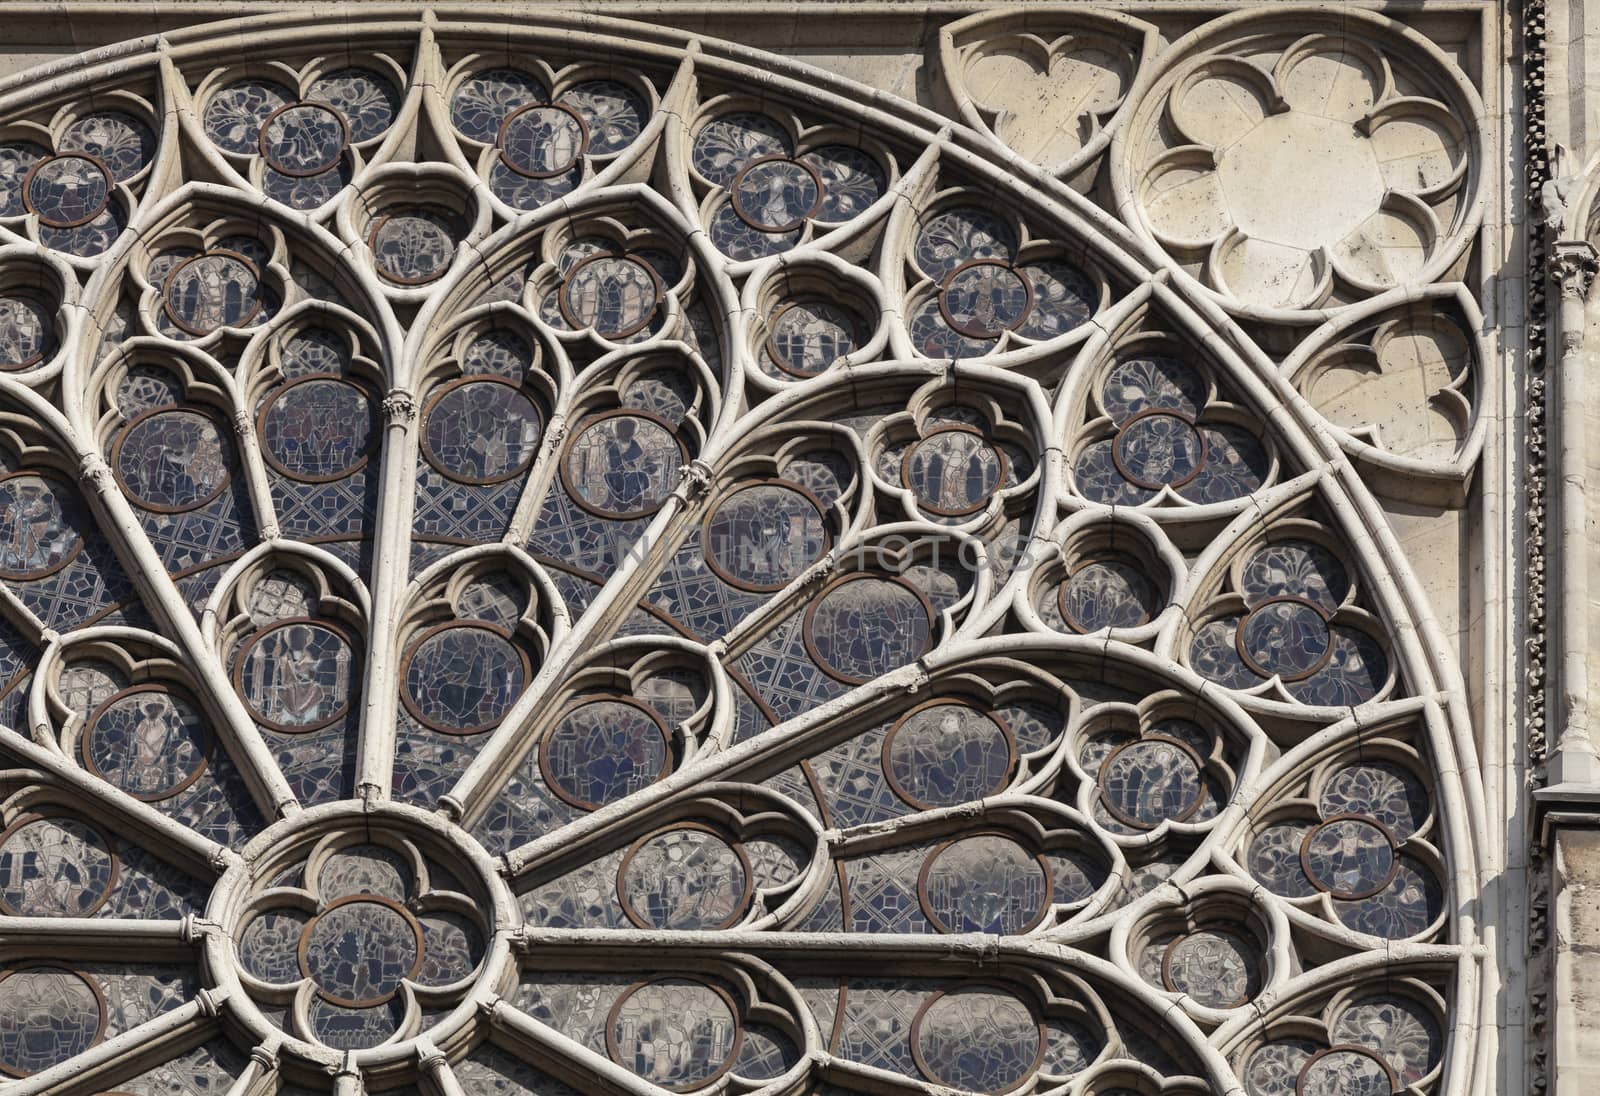 PARIS - OCTOBER 25, 2016: South rose window of Notre Dame cathedral by Goodday